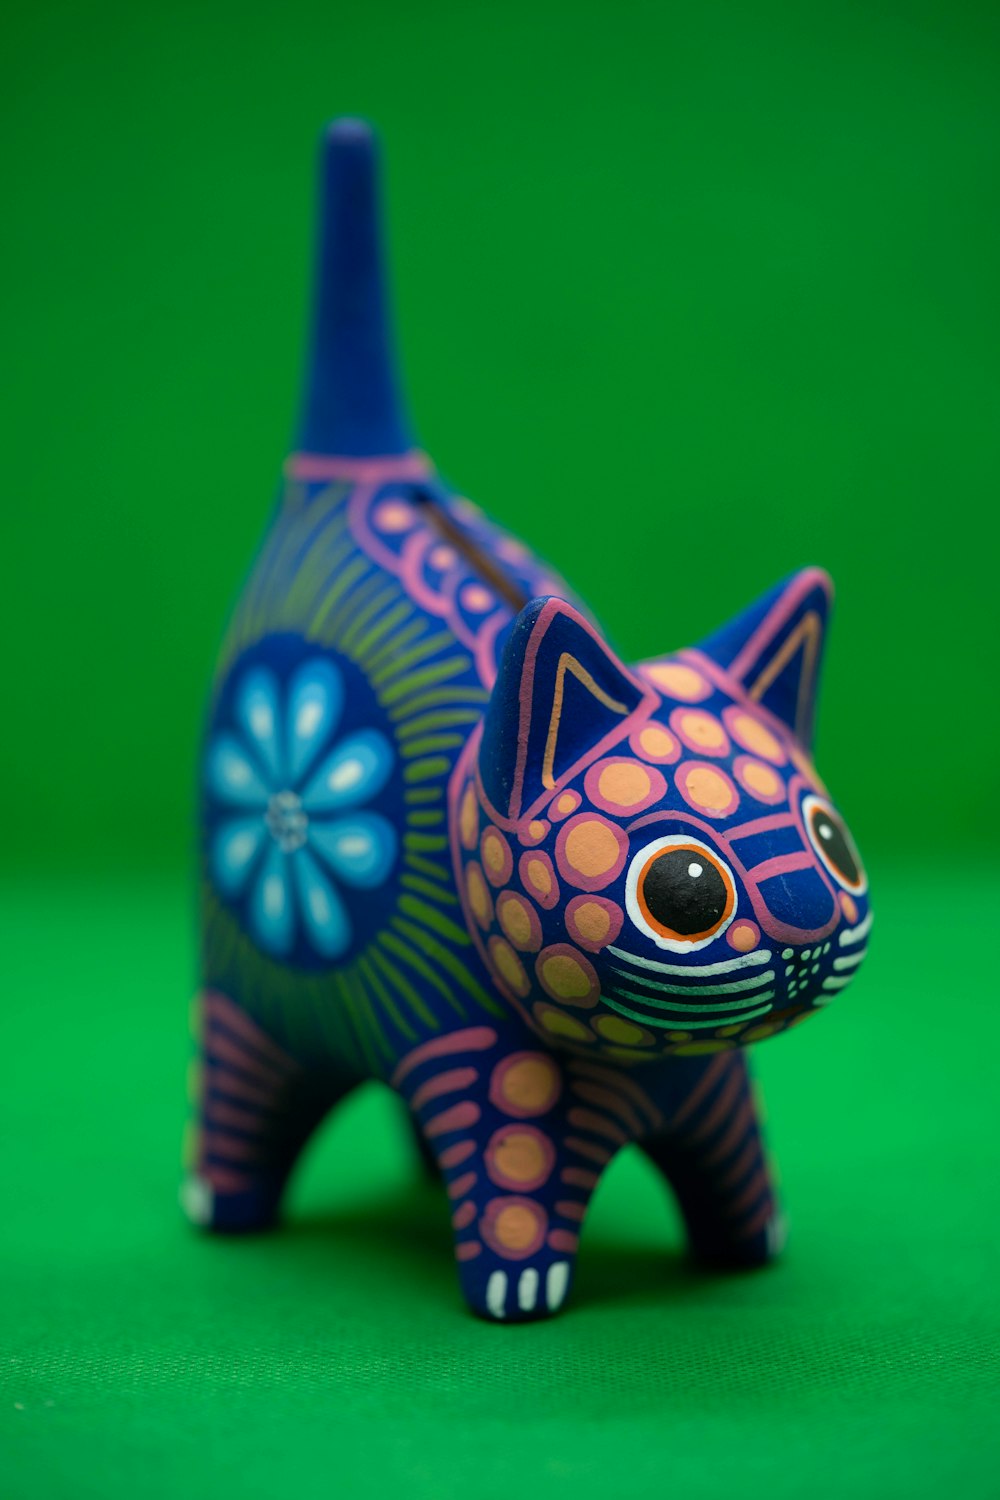 a colorful cat figurine sitting on a green surface